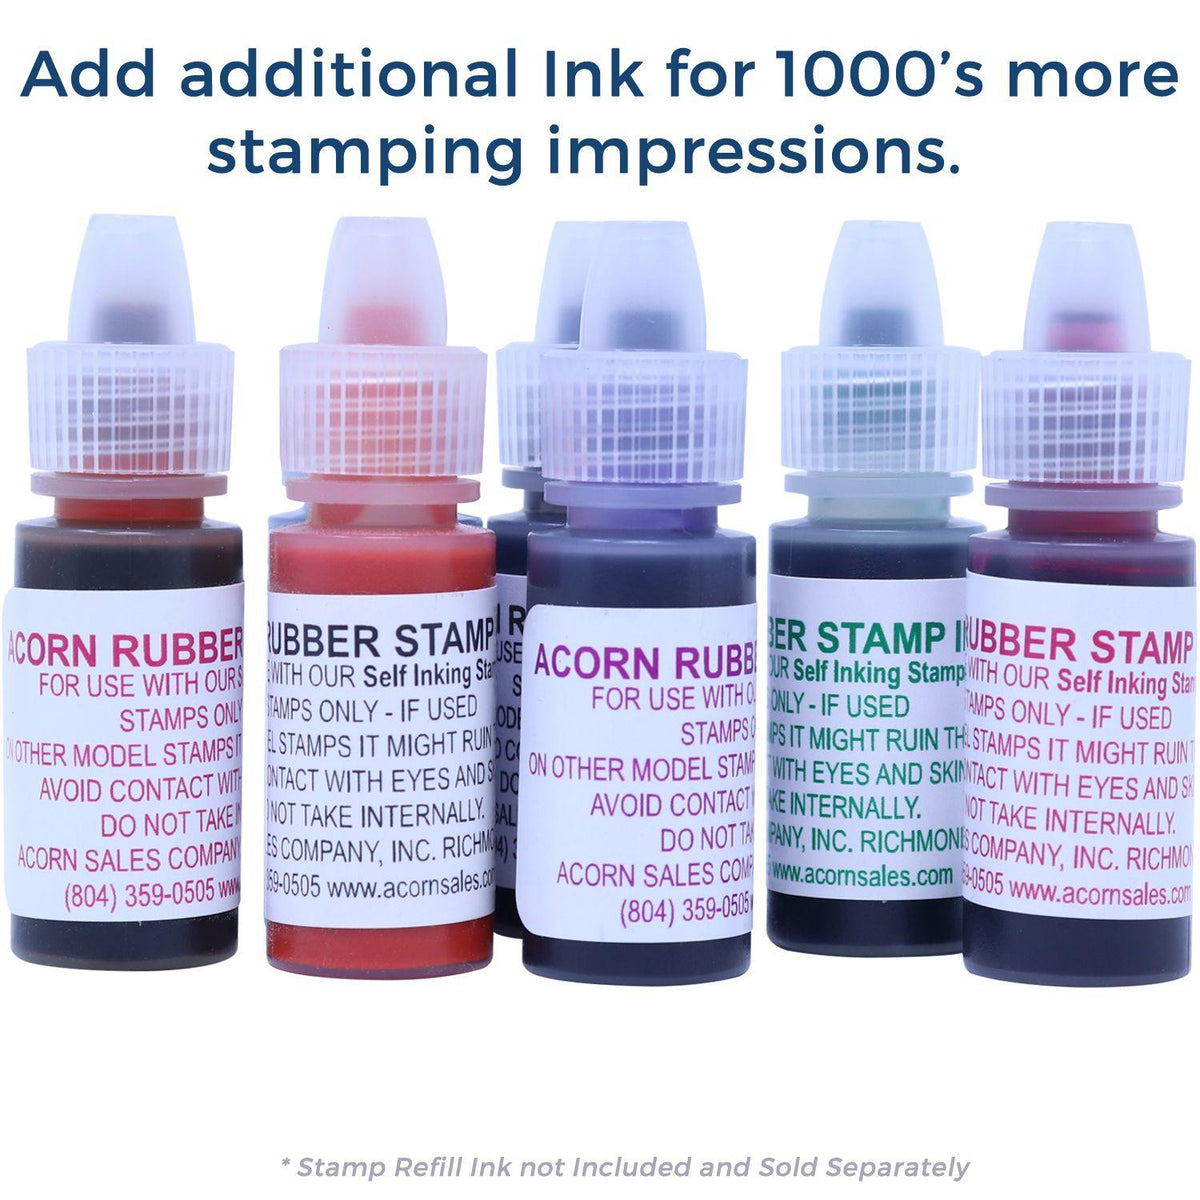 Refill Inks for Large Pre-Inked Confirmation Stamp Available